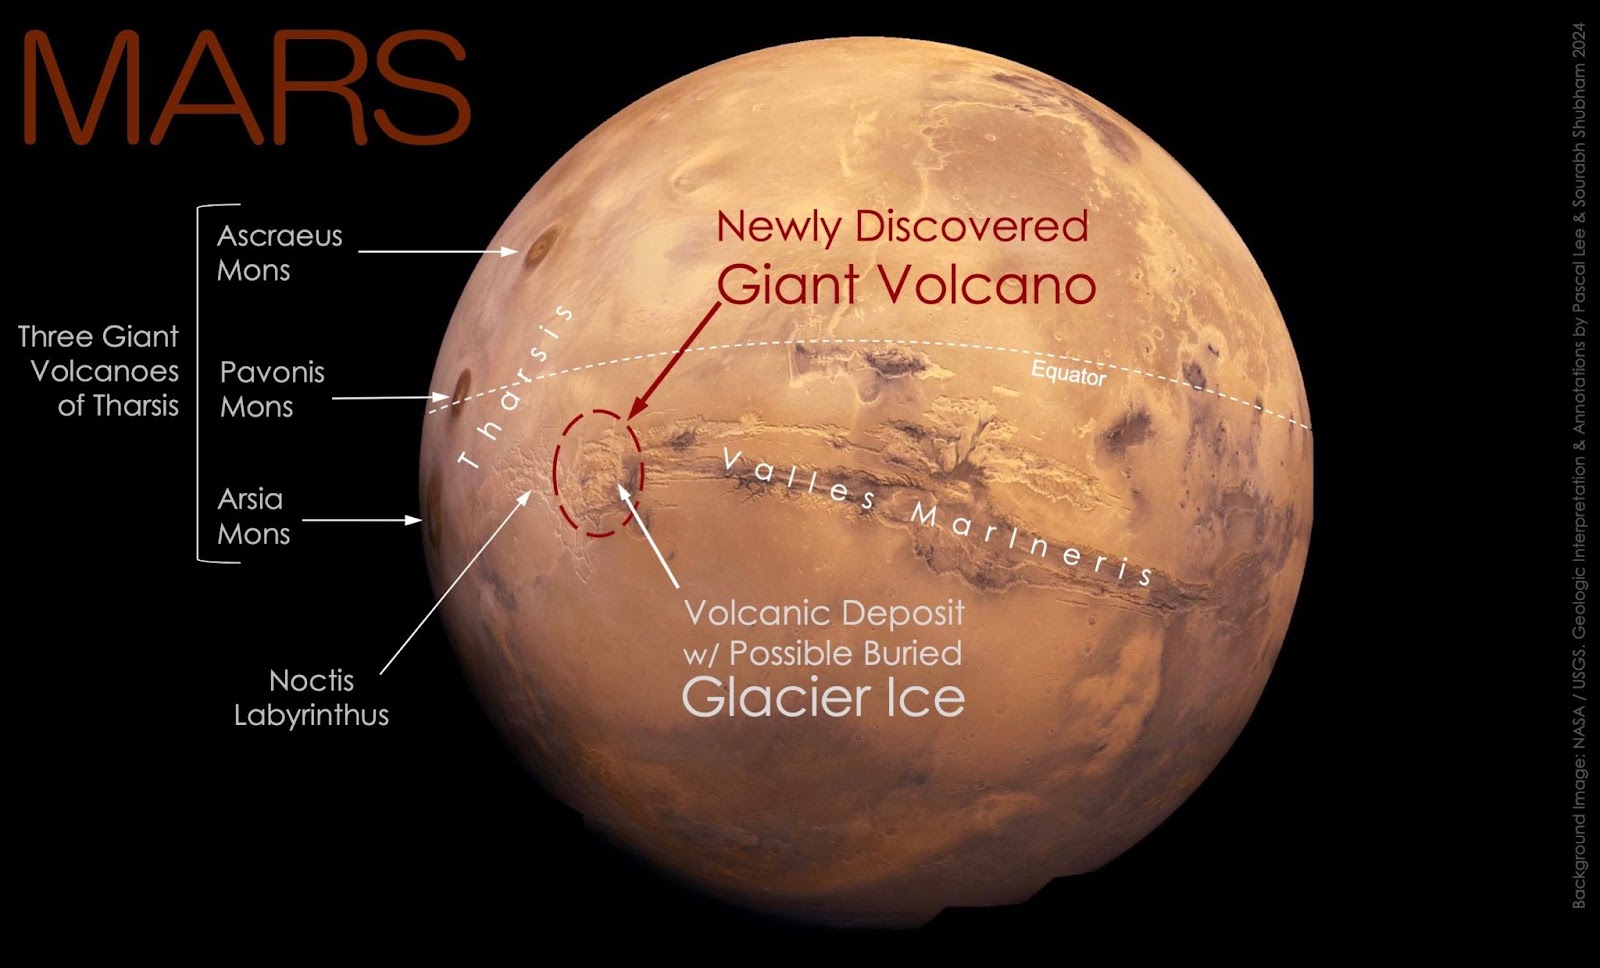 Annotated image of Mars highlighting notable geological features including the new volcano